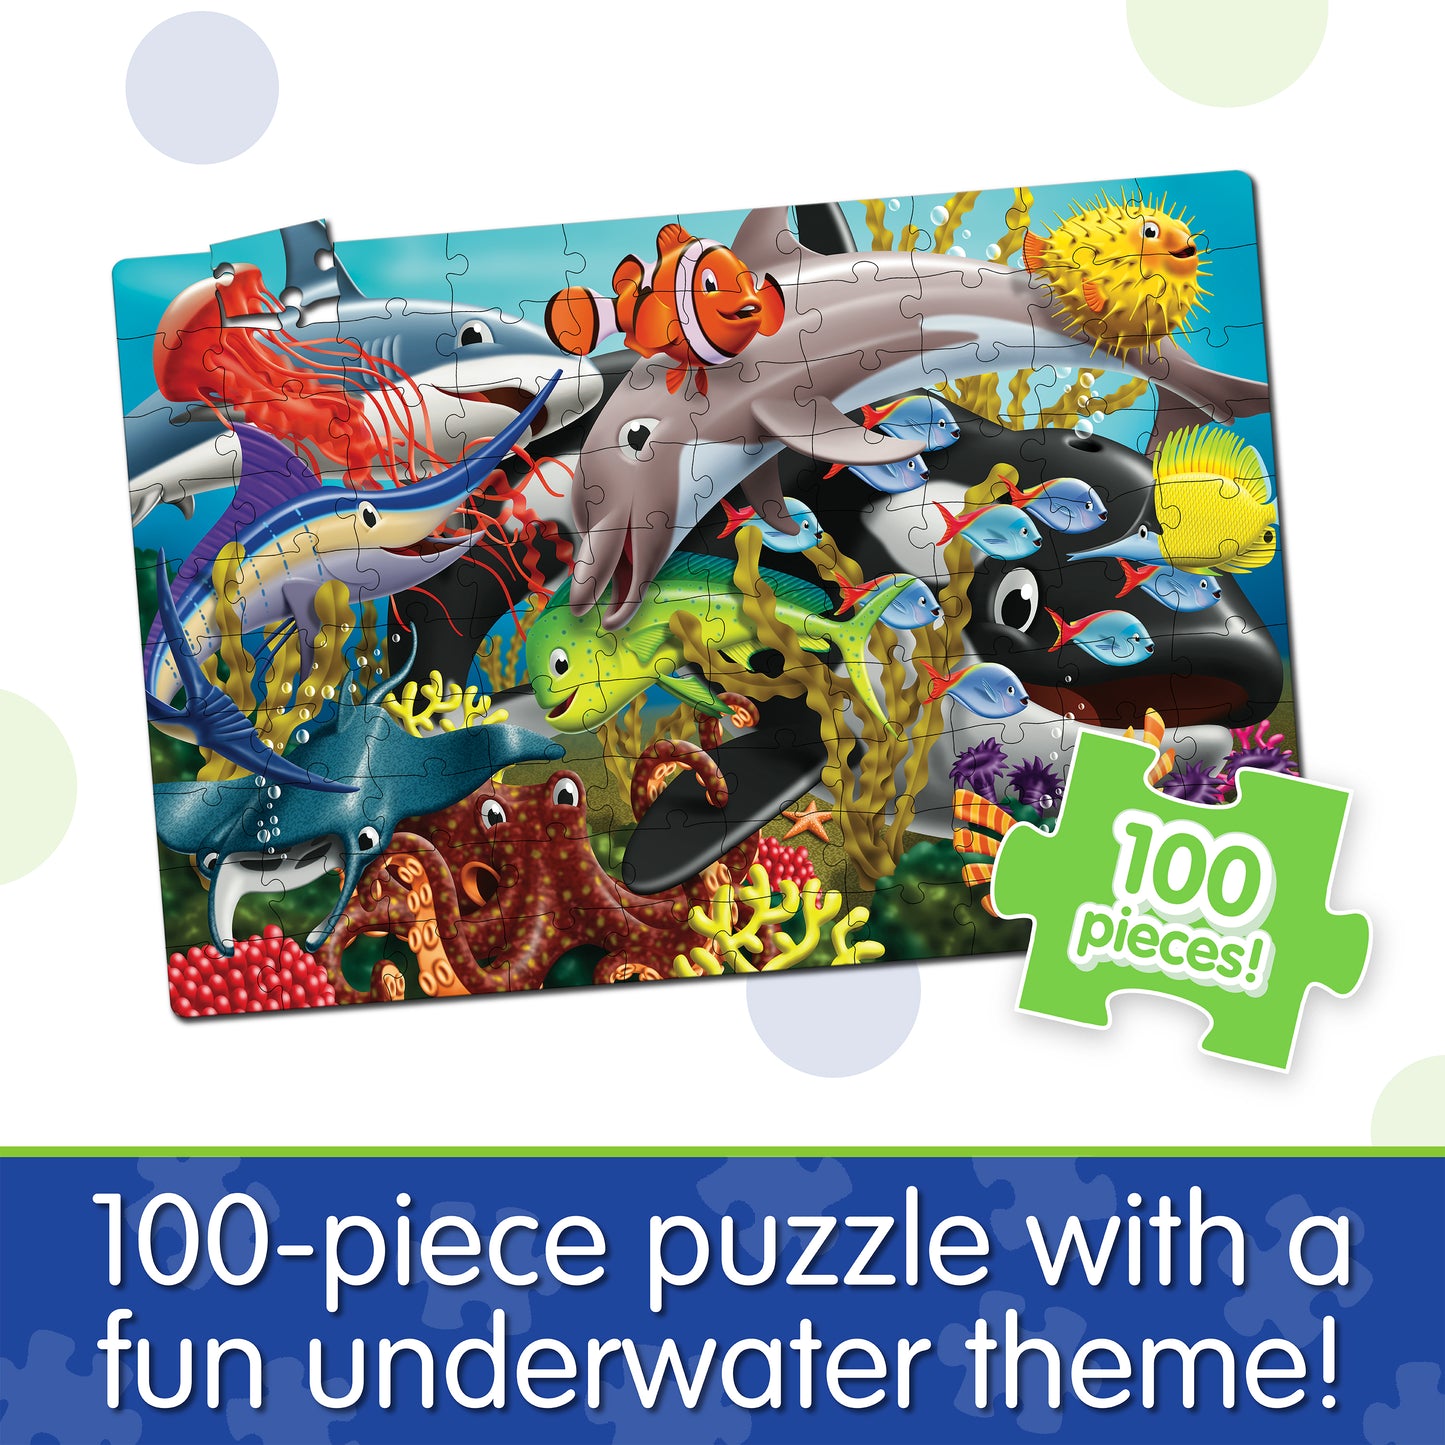 Infographic about Glow in the Dark - Sea Life that says, "100-piece puzzle with a fun underwater theme!"